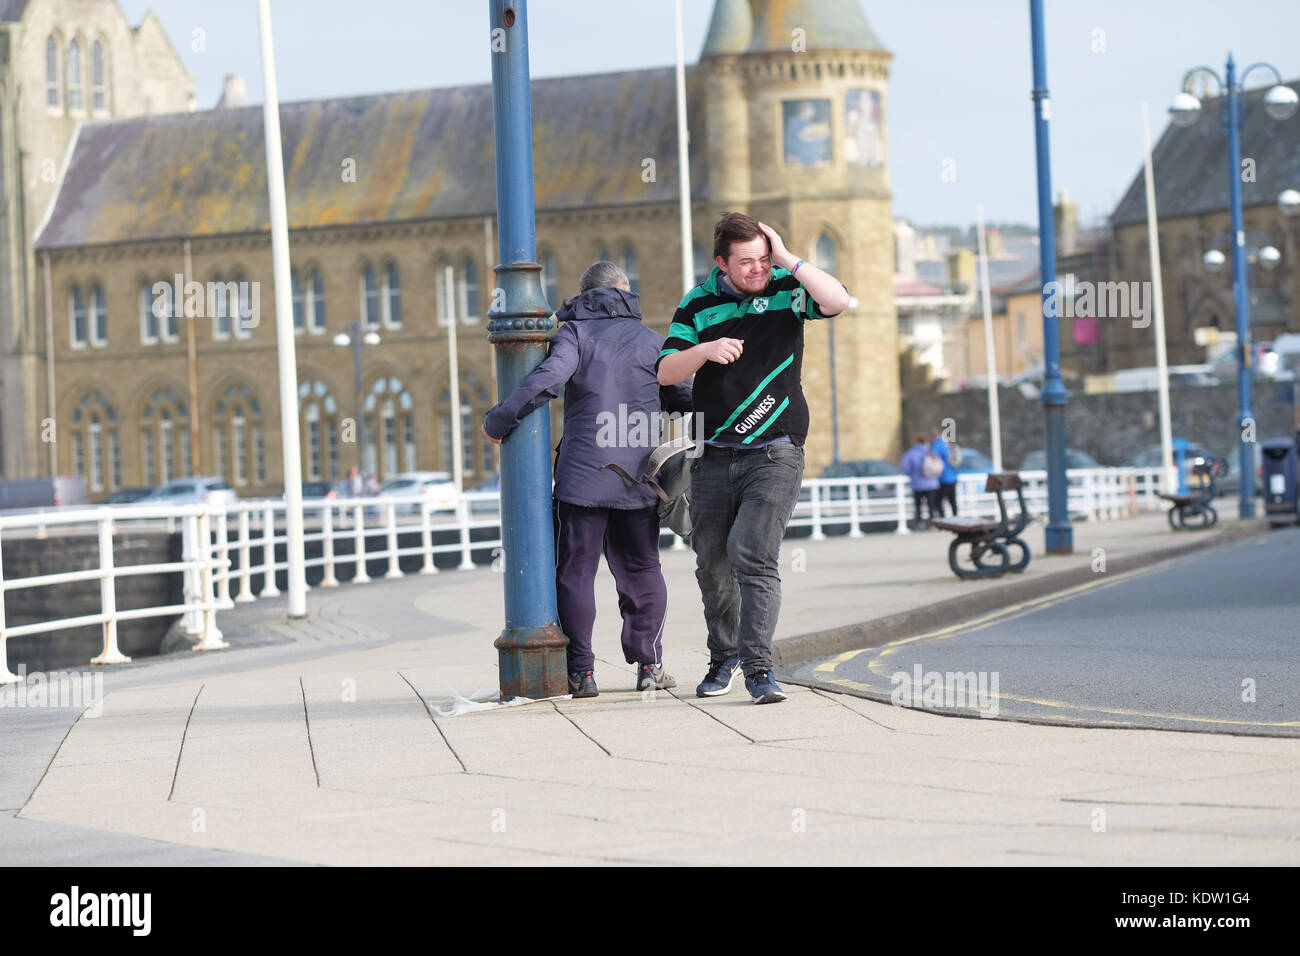 Aberystwyth, Ceredigion, Wales, UK. 16th Oct, 2017. UK Weather. A young man finds it tough going as he turns onto the promenade into the strong winds at Aberystwyth on the West Wales coast as Storm Ophelia approaches off the Irish Sea with local winds exceeding 50mph. Photo Steven May / Alamy Live News Stock Photo